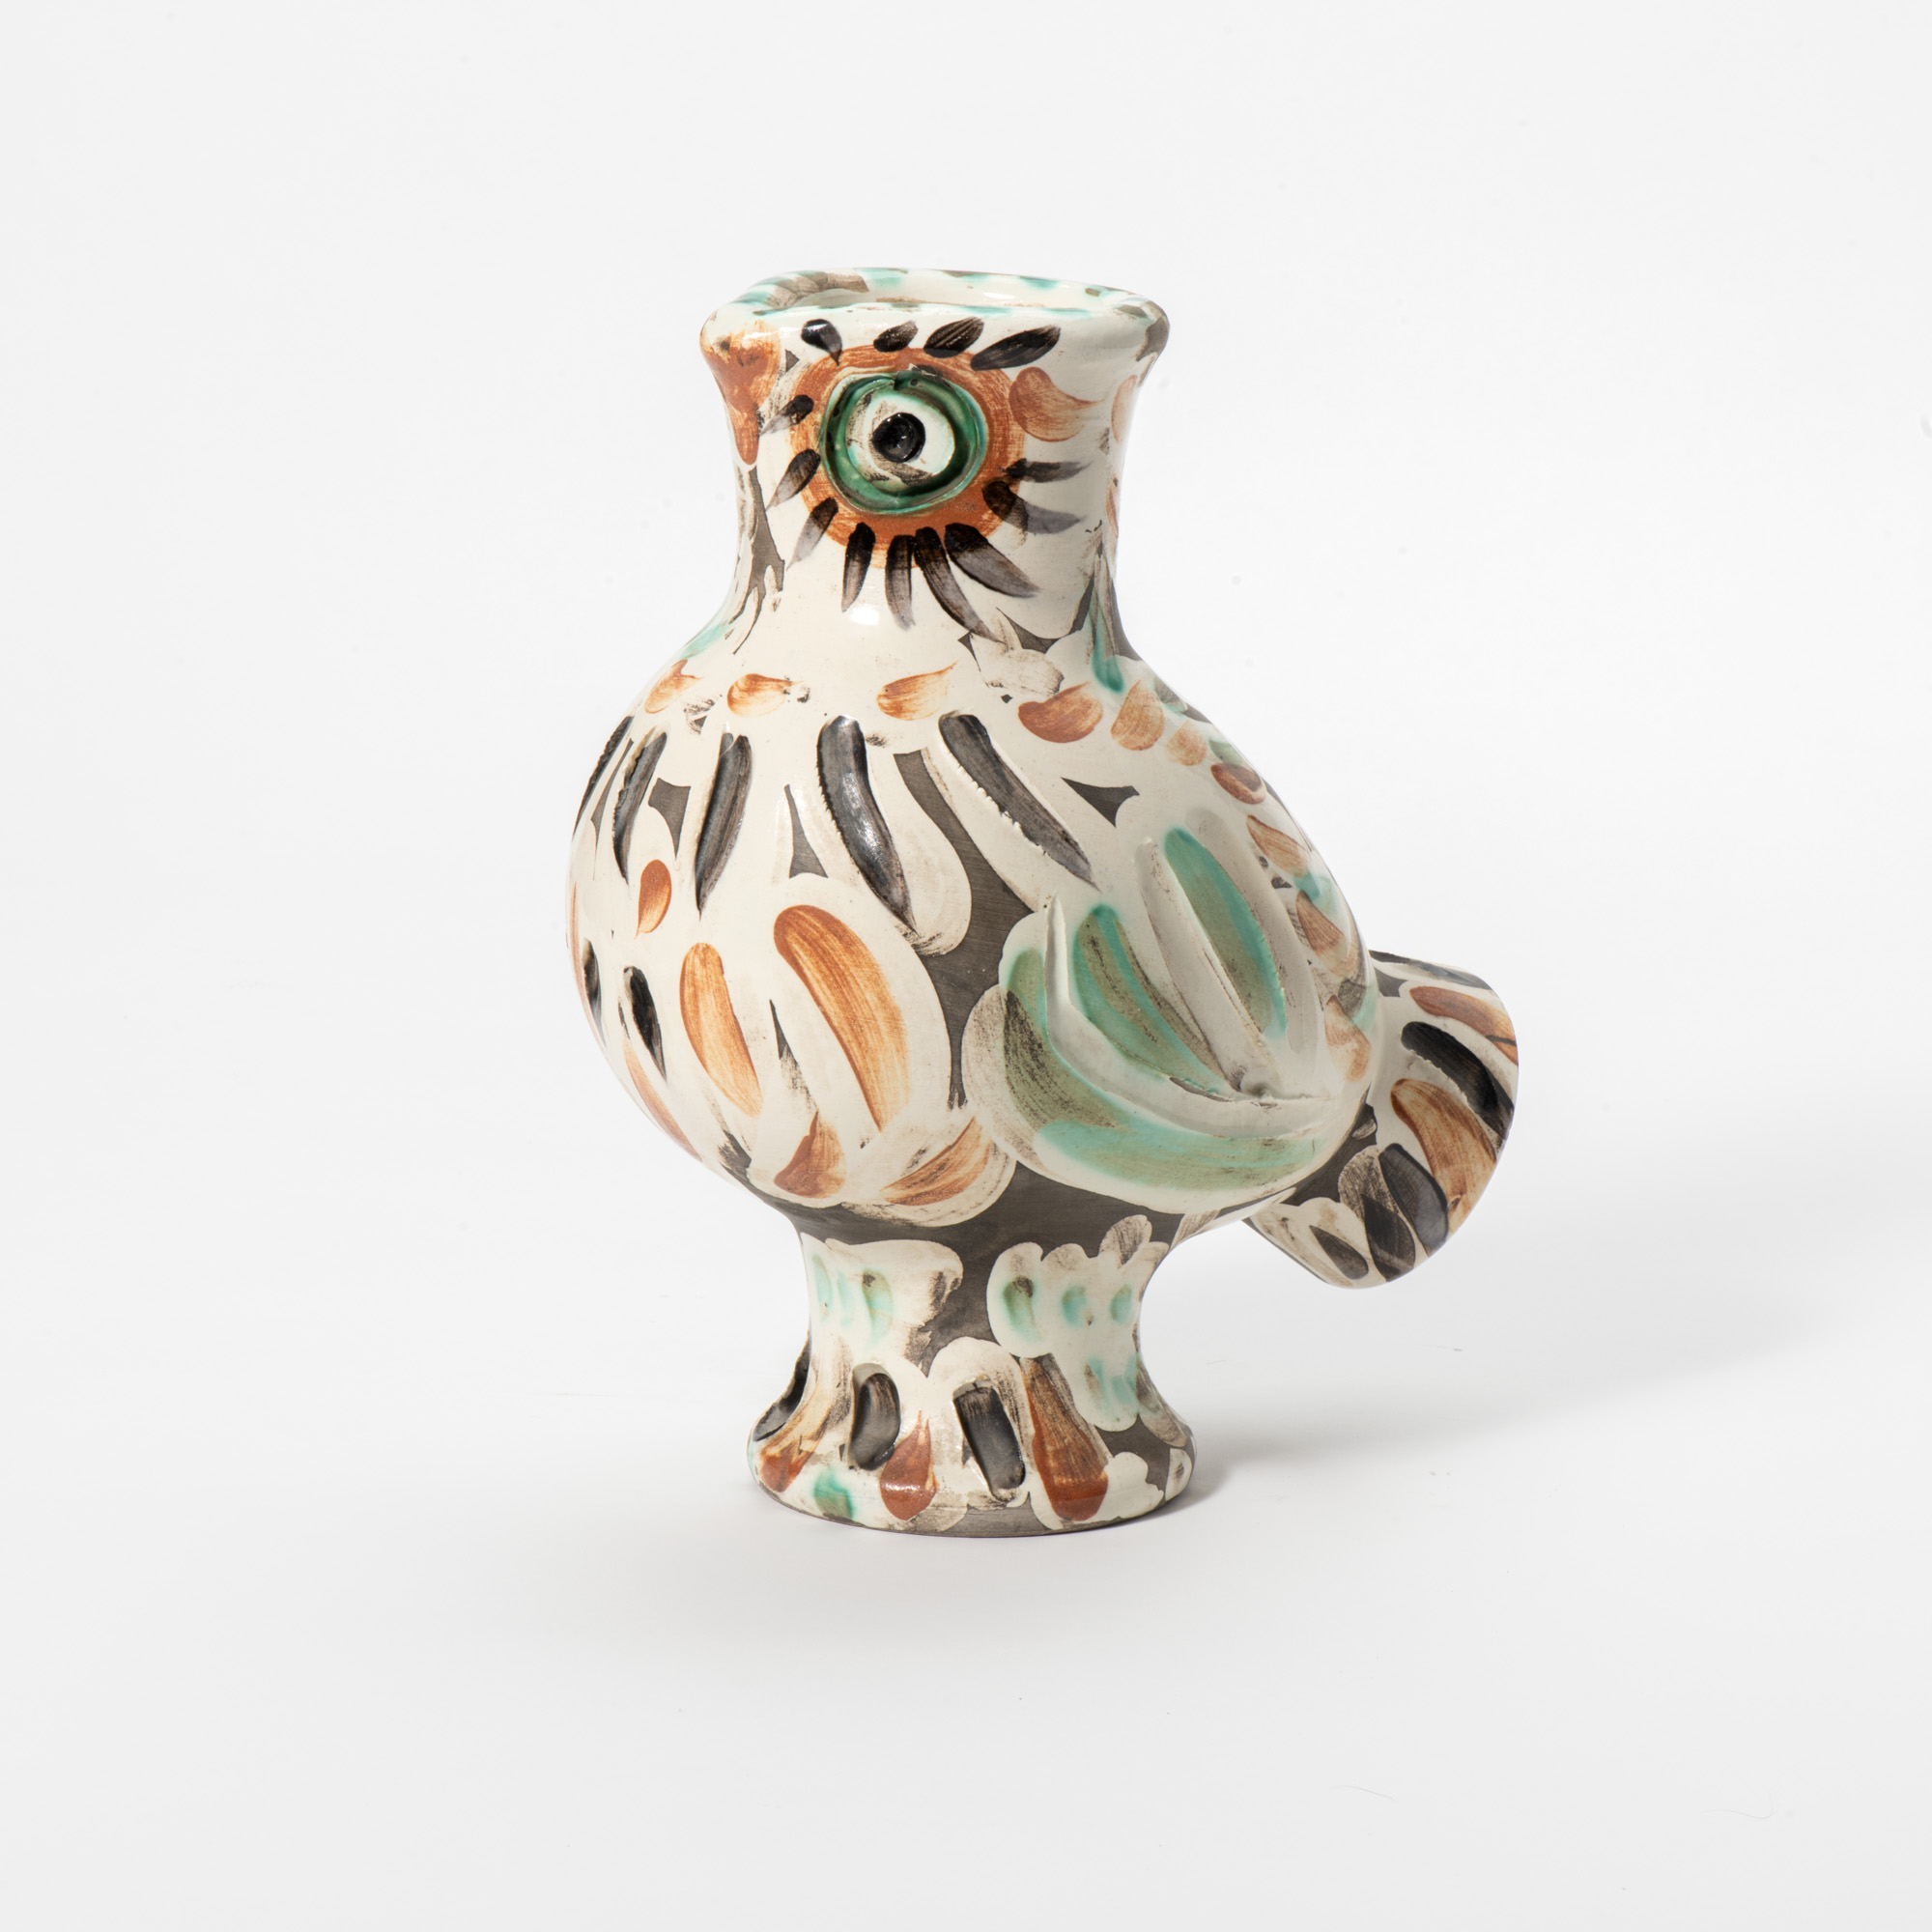 Chouette (Wood-Owl) (1969)